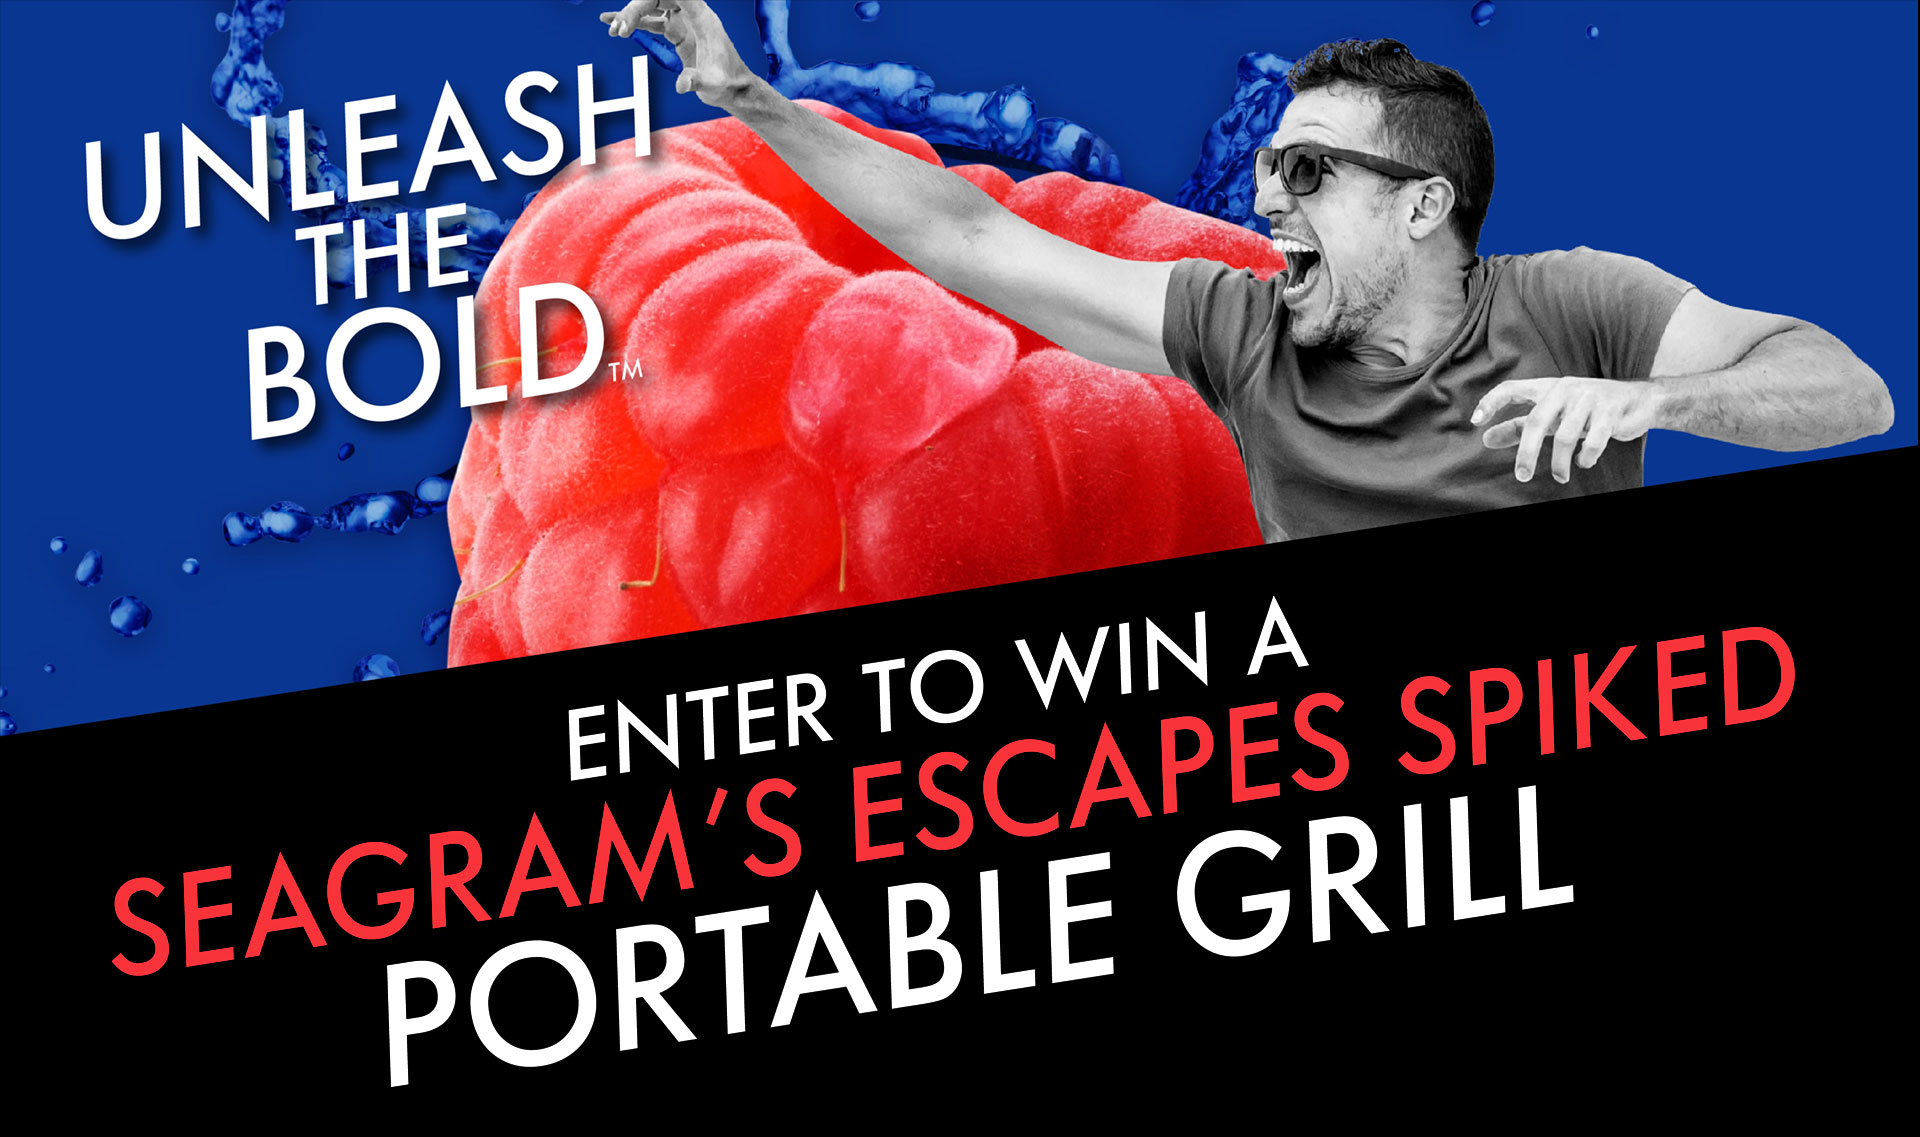 Promotional Image for the Seagrams Escapes Spiked Portable Grill Sweepstakes. Text Reads: Unleash the Bold. Enter to Win a Seagrams Escapes Spiked Portable Grill.